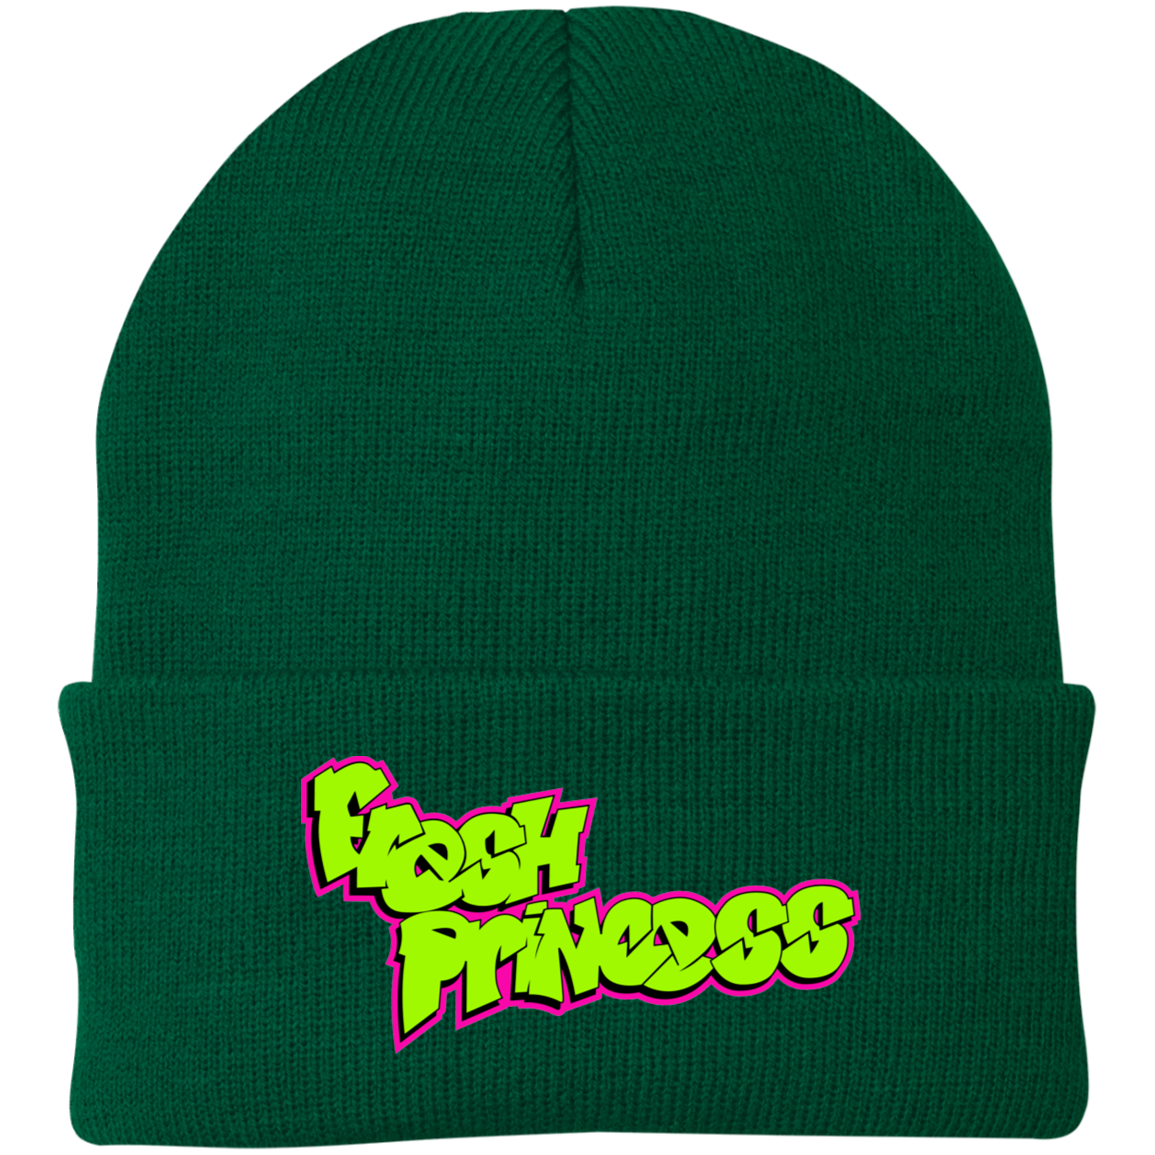 Princess Embroidered Knit Cap